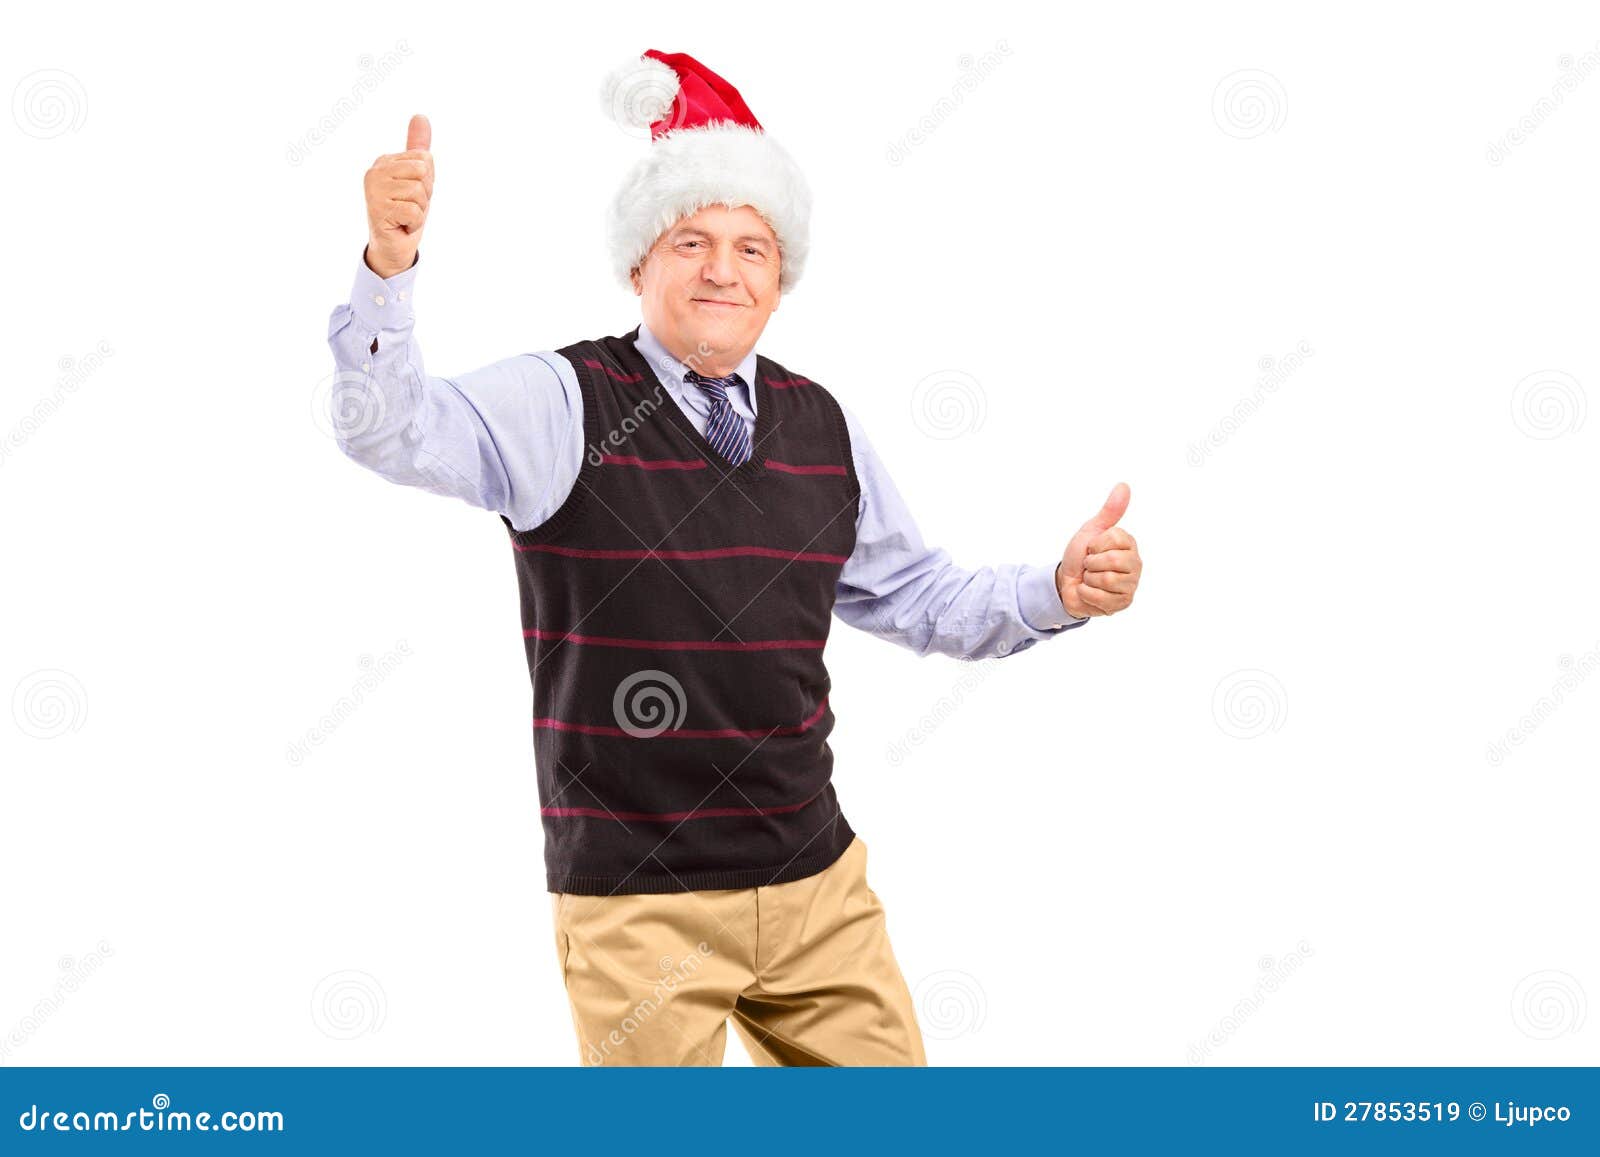 Happy Mature Gentleman with Hat Giving Thumbs Up Stock Image - Image of ...